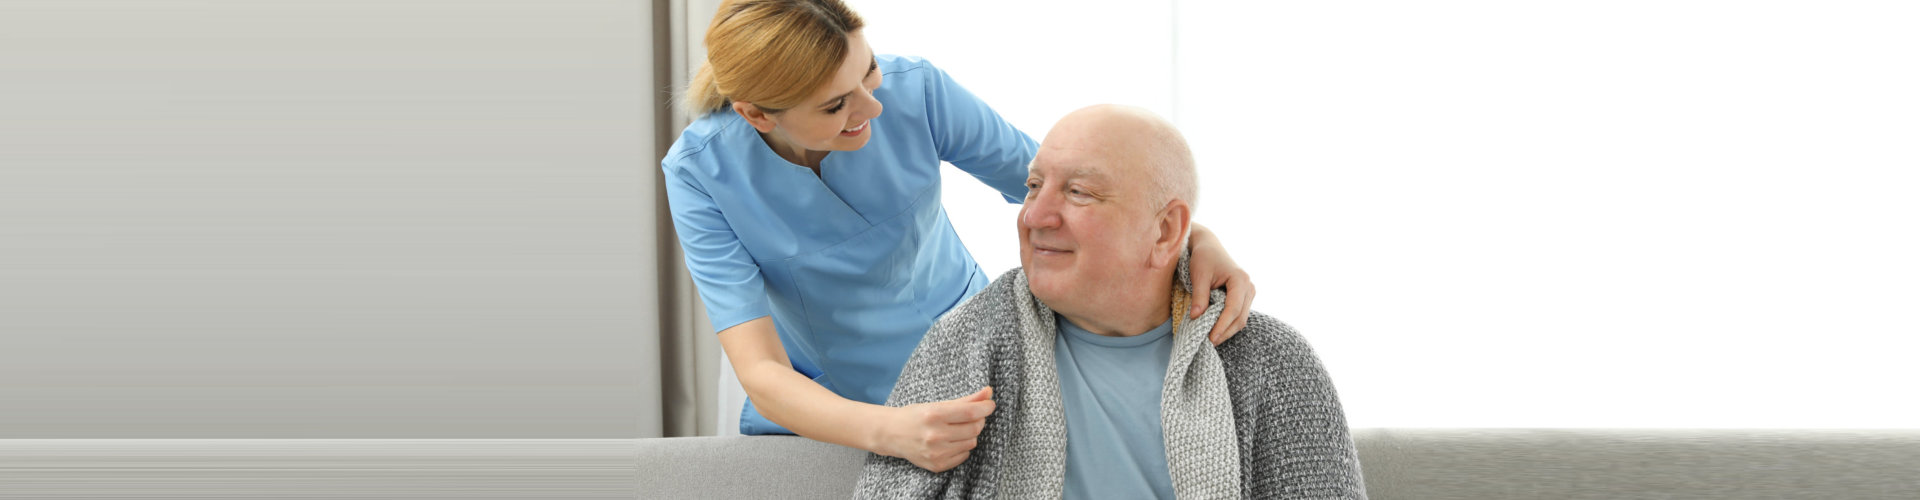 caregiver checking her senior patient on couch